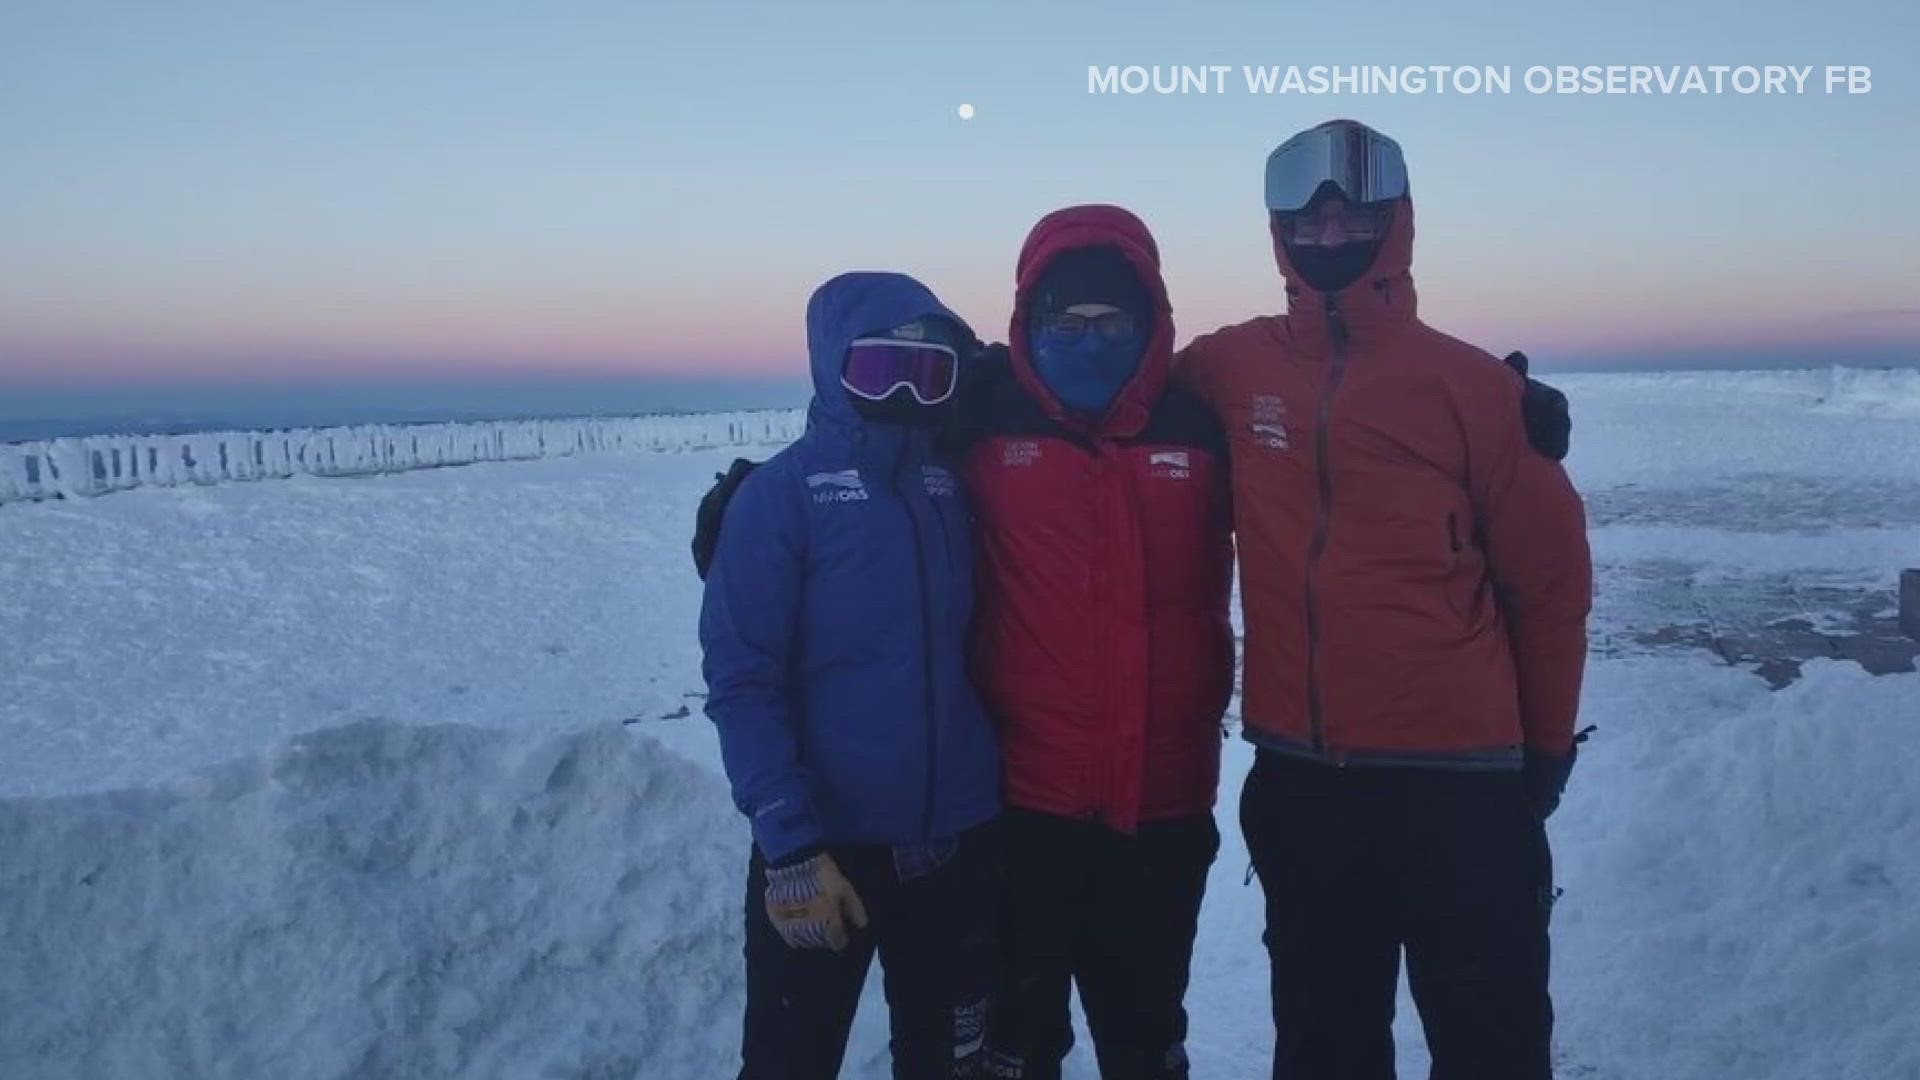 Wind gusts hit above 120 mph at some points, driving the wind chill to minus 108 degrees Fahrenheit. Weather observers took turns braving the elements.